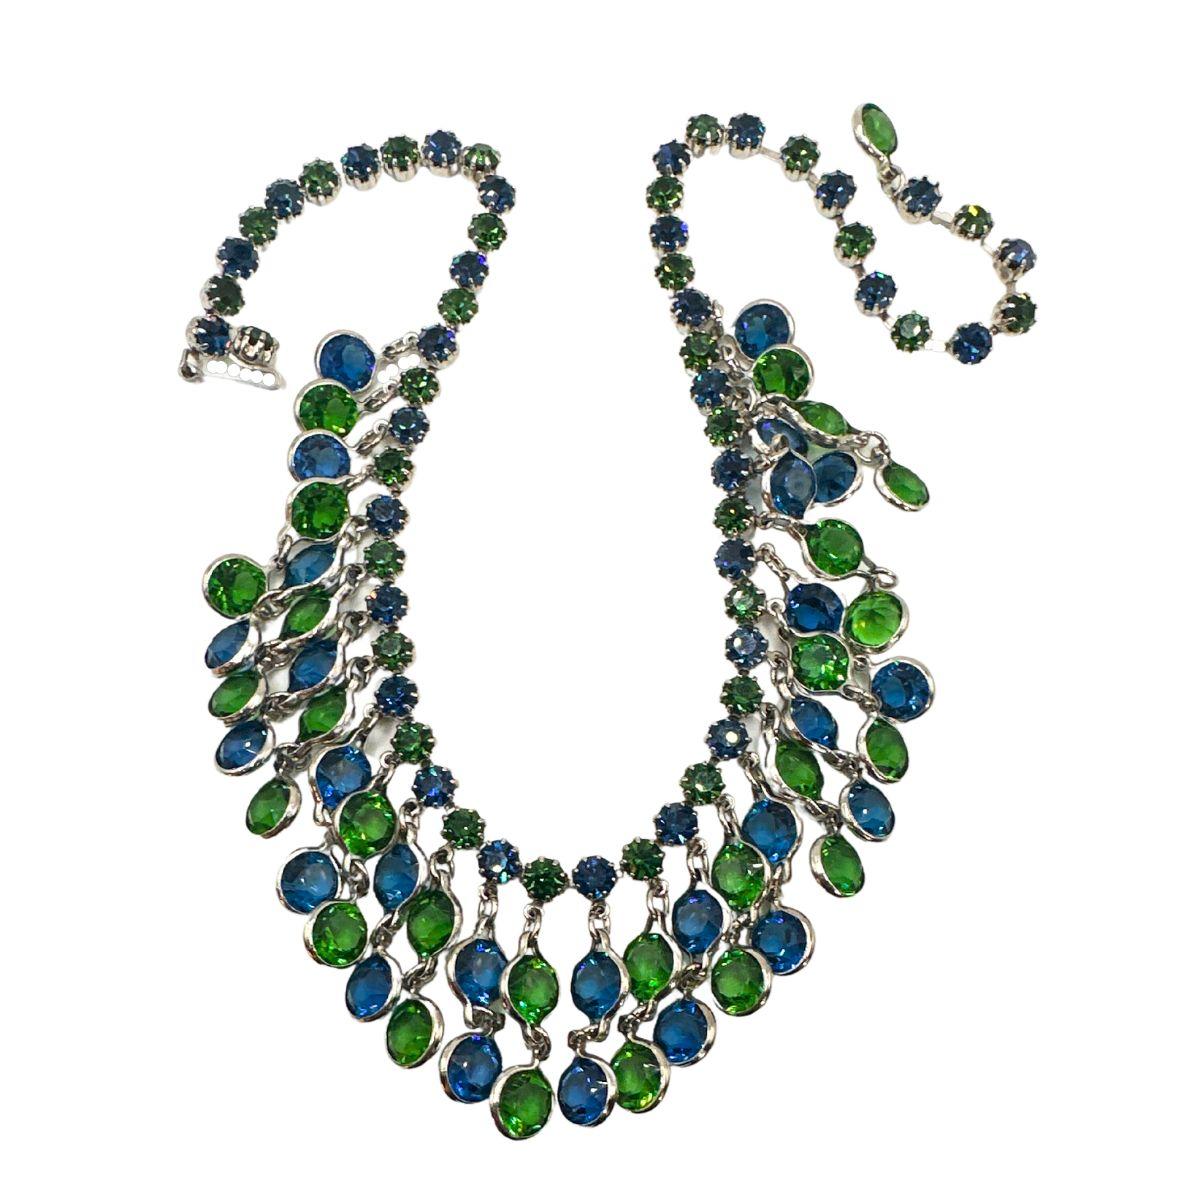 Necklace Length: 17″:

Bin Code: N12 /P13

Add a touch of vintage charm to your ensemble with this exquisite Weiss Vintage Blue and Green Glass Multi-Drops Charm Necklace and Earrings Set. Crafted with meticulous attention to detail, this set